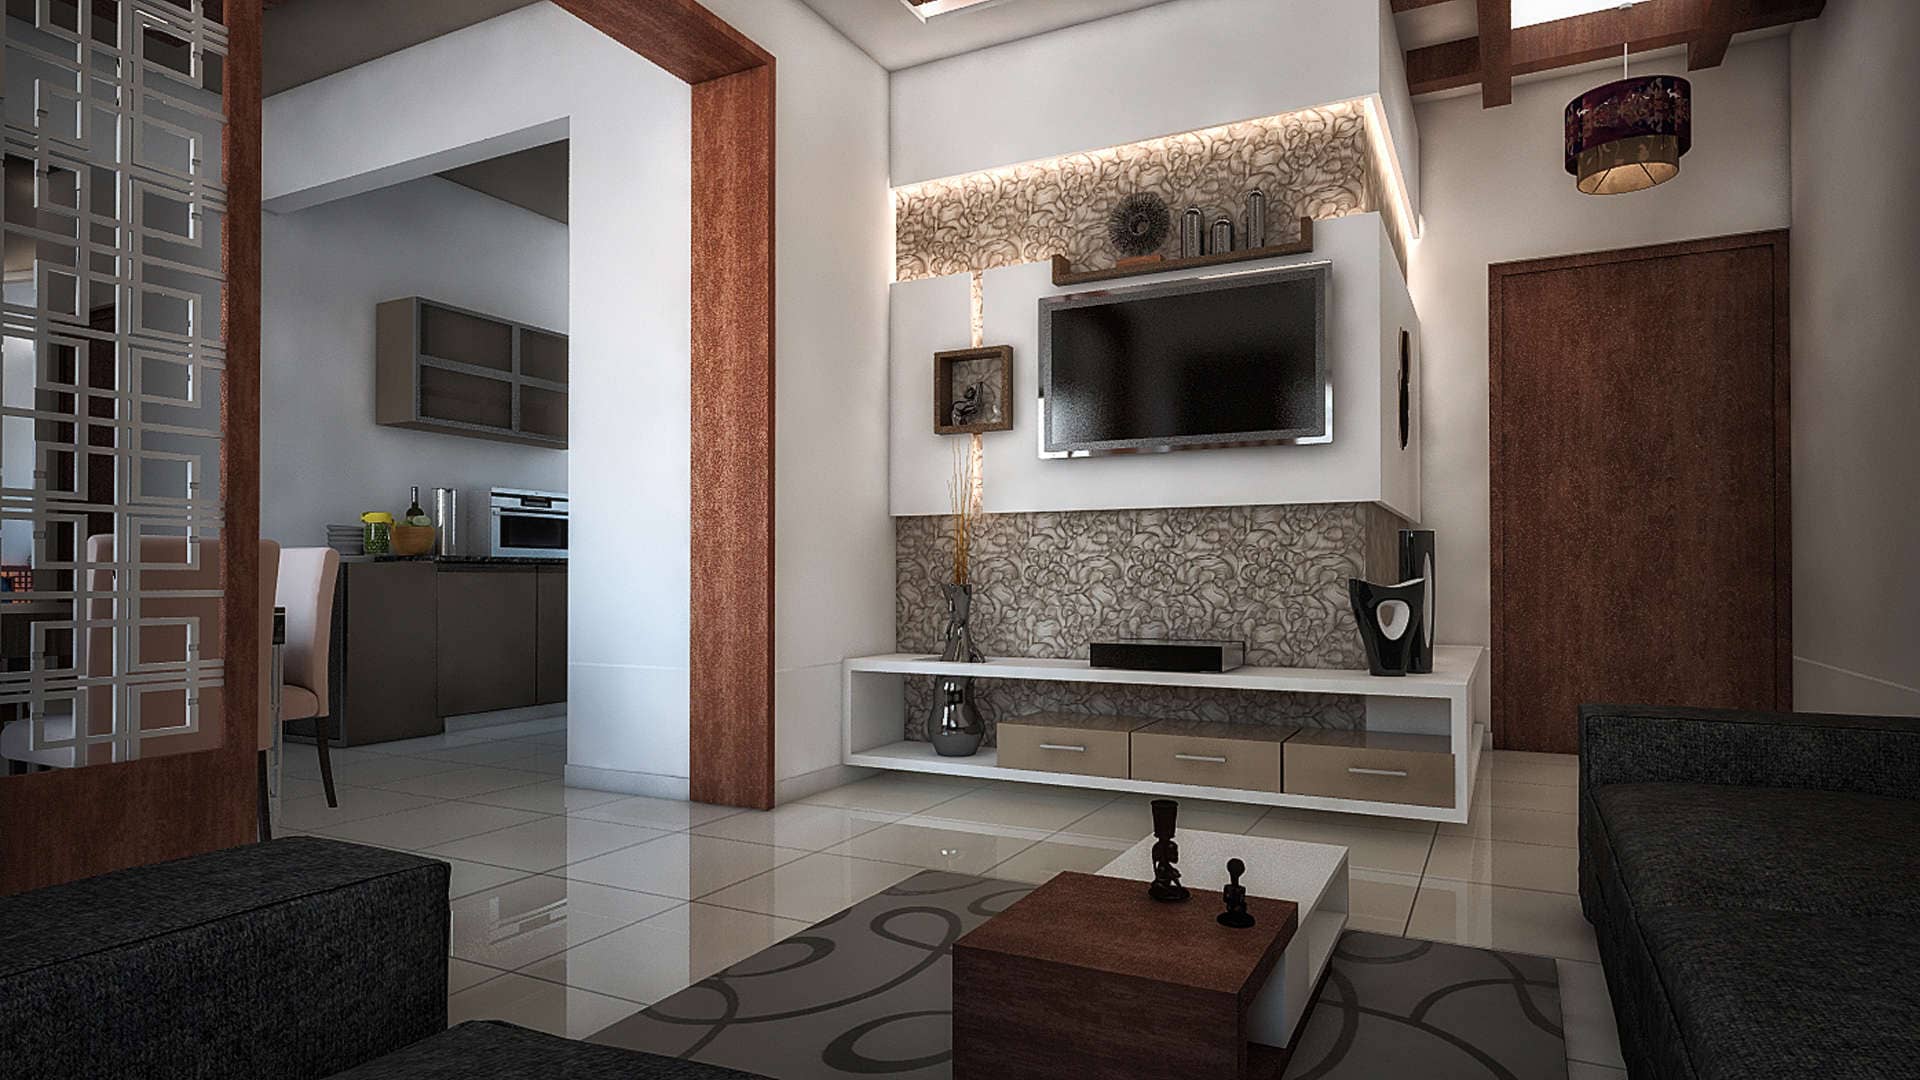 Living Room and Kitchen View 3D Rendering